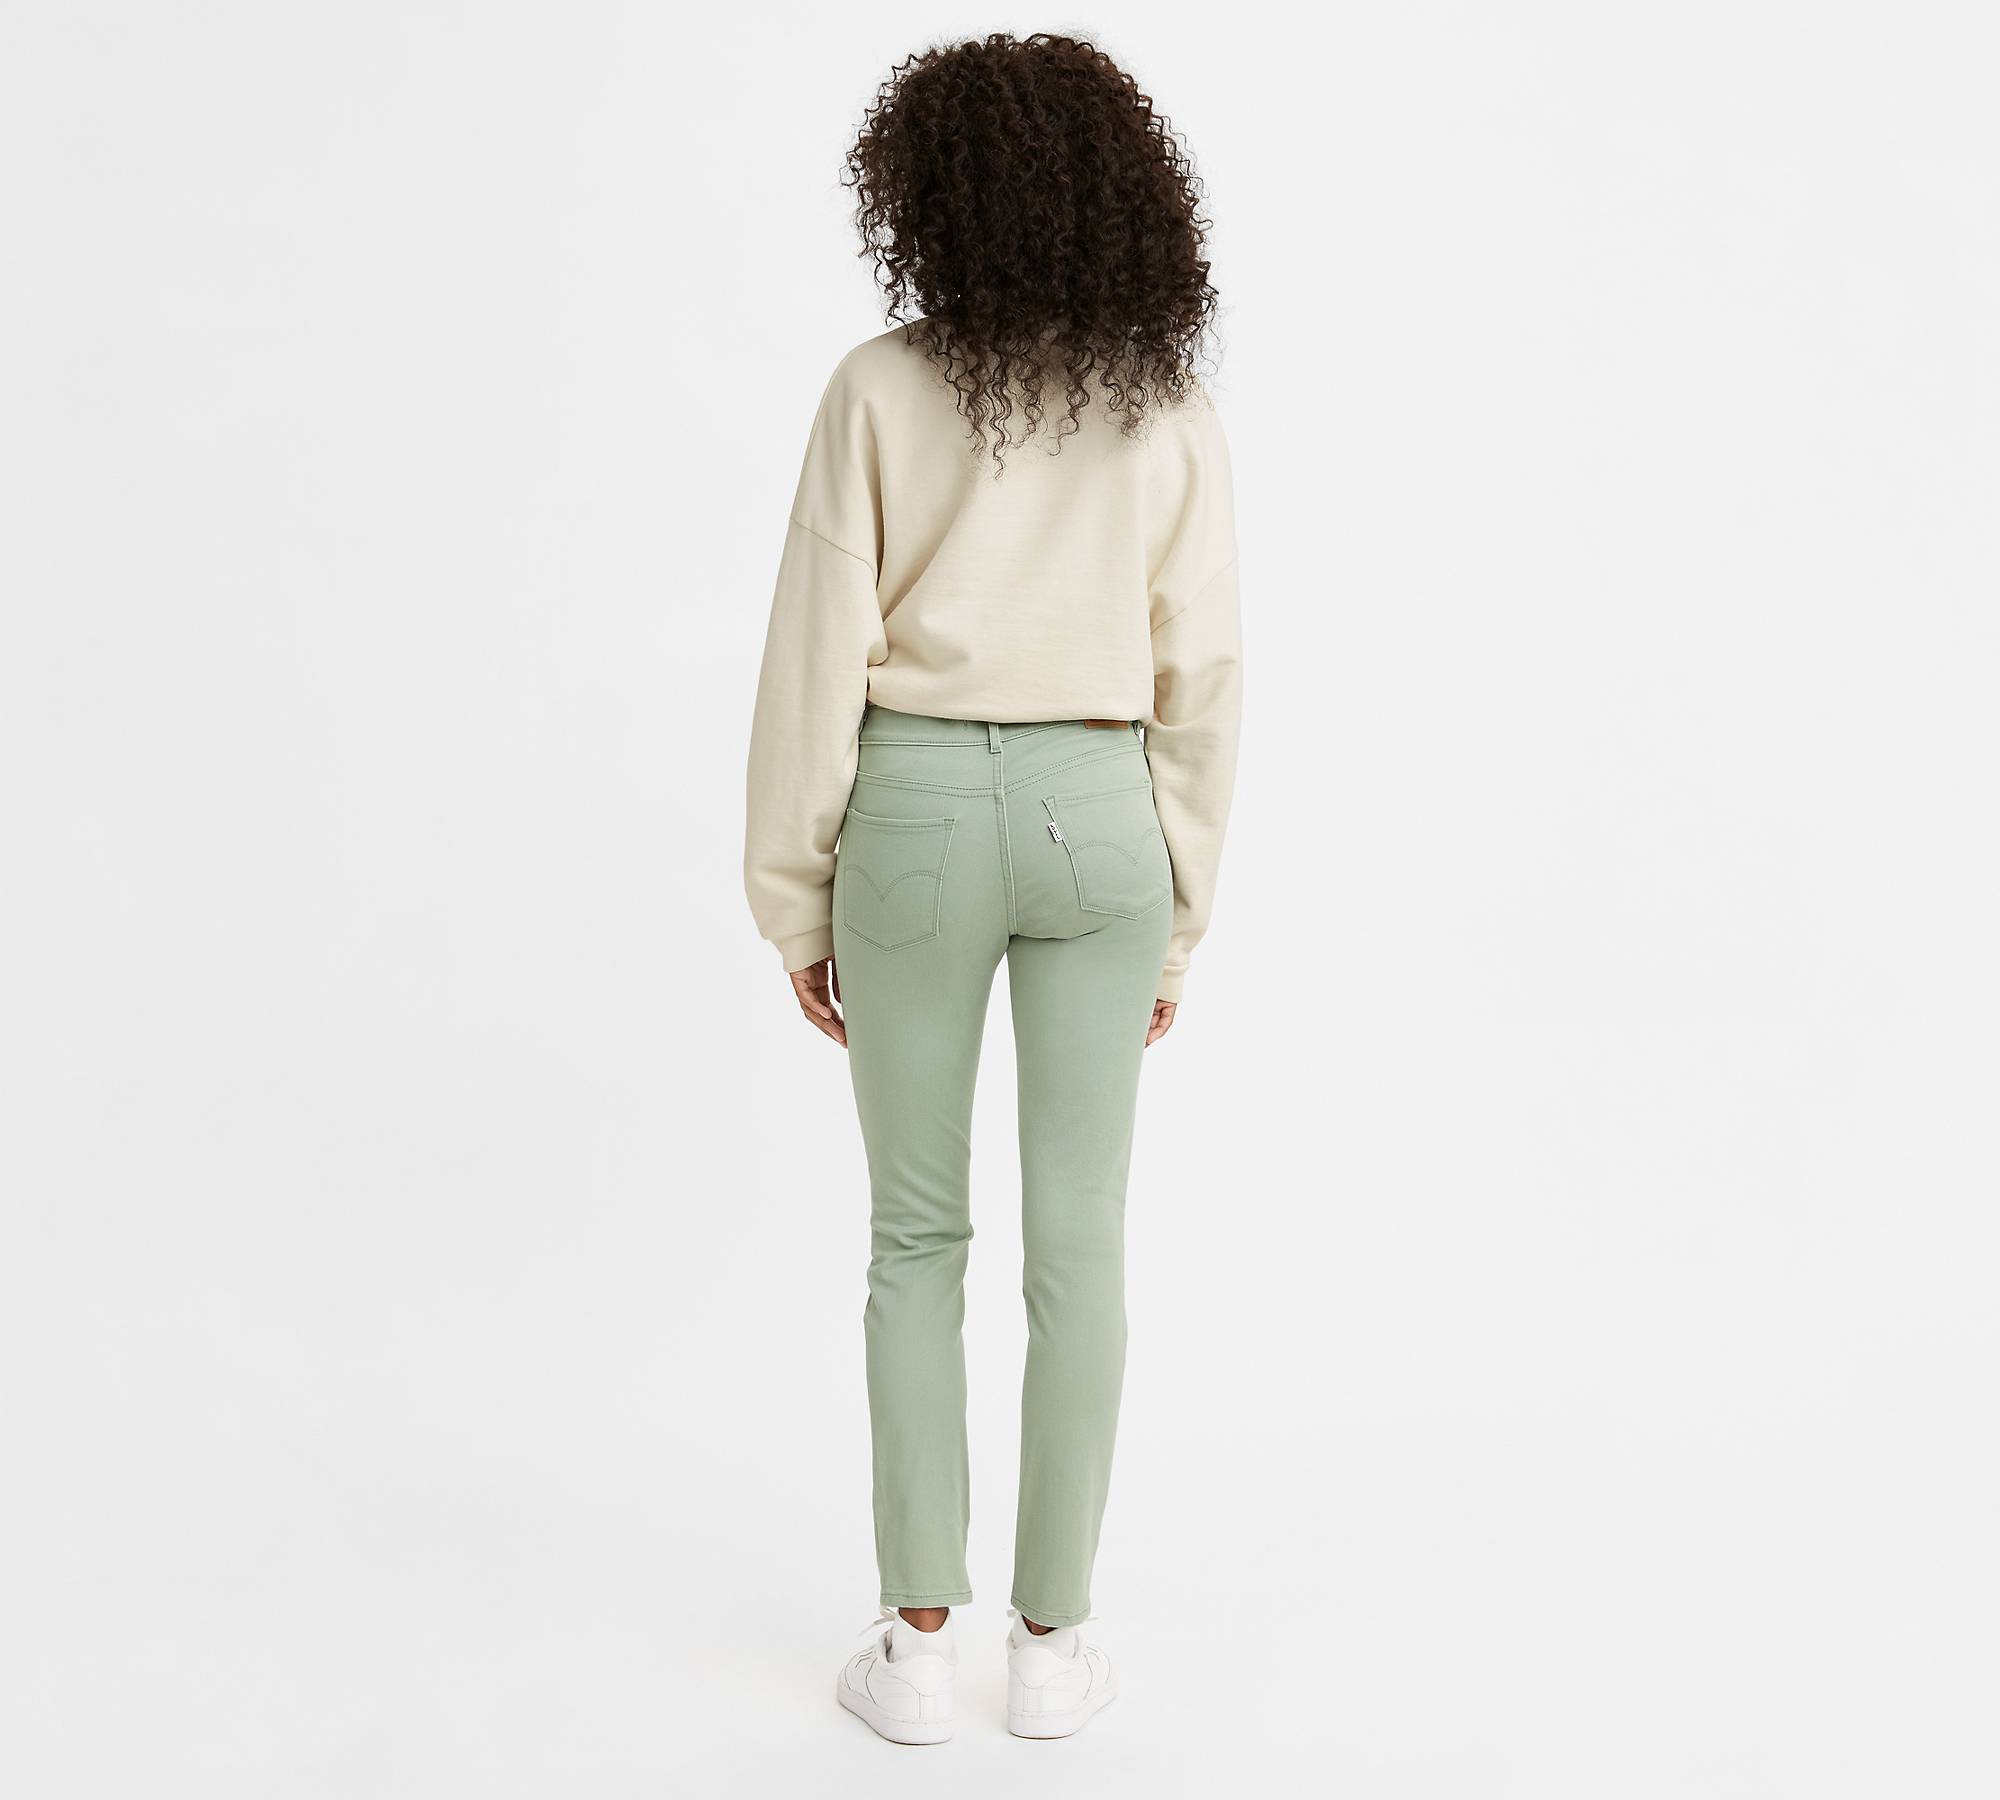 311 Shaping Skinny Women's Jeans - Green | Levi's® US